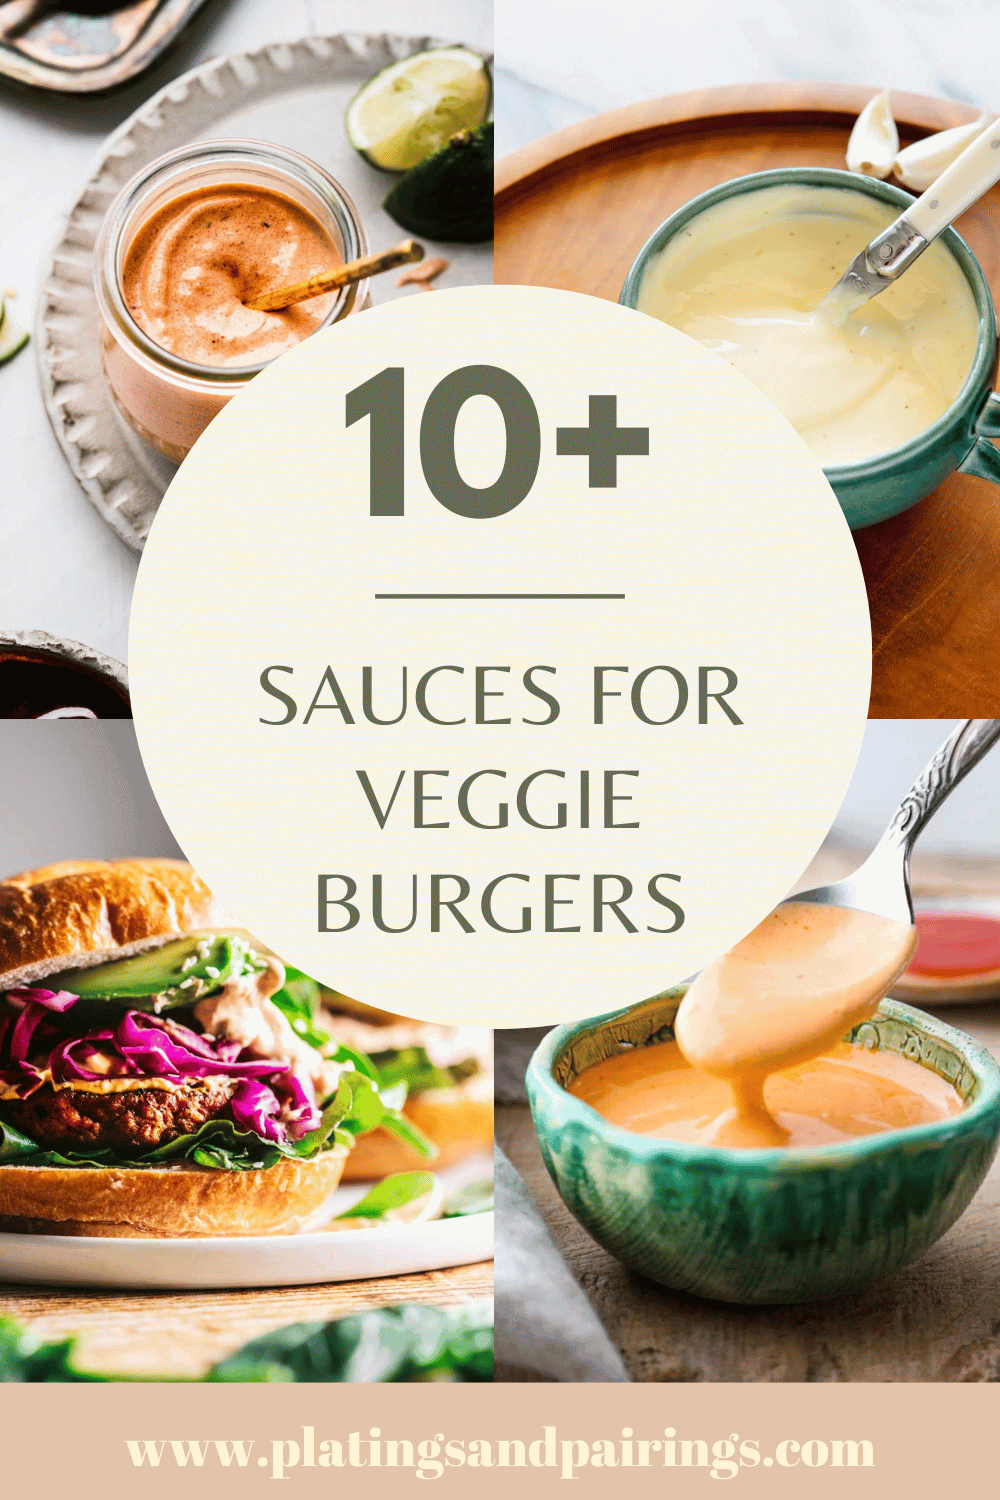 Collage of sauces for veggie burgers with text overlay.